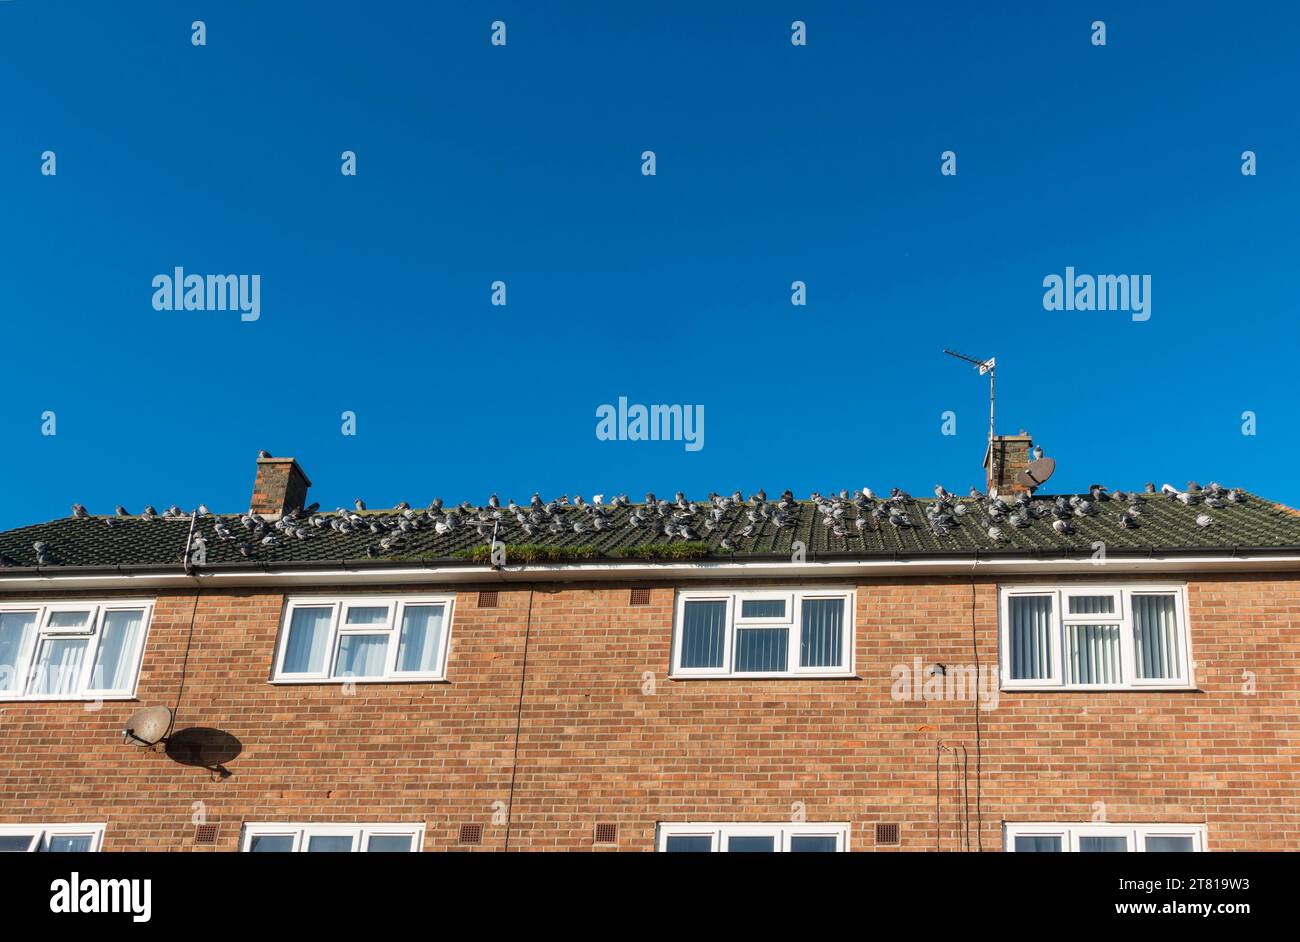 A flock of pigeons sitting on the roof of houses in Hartlepool, England, UK Stock Photo